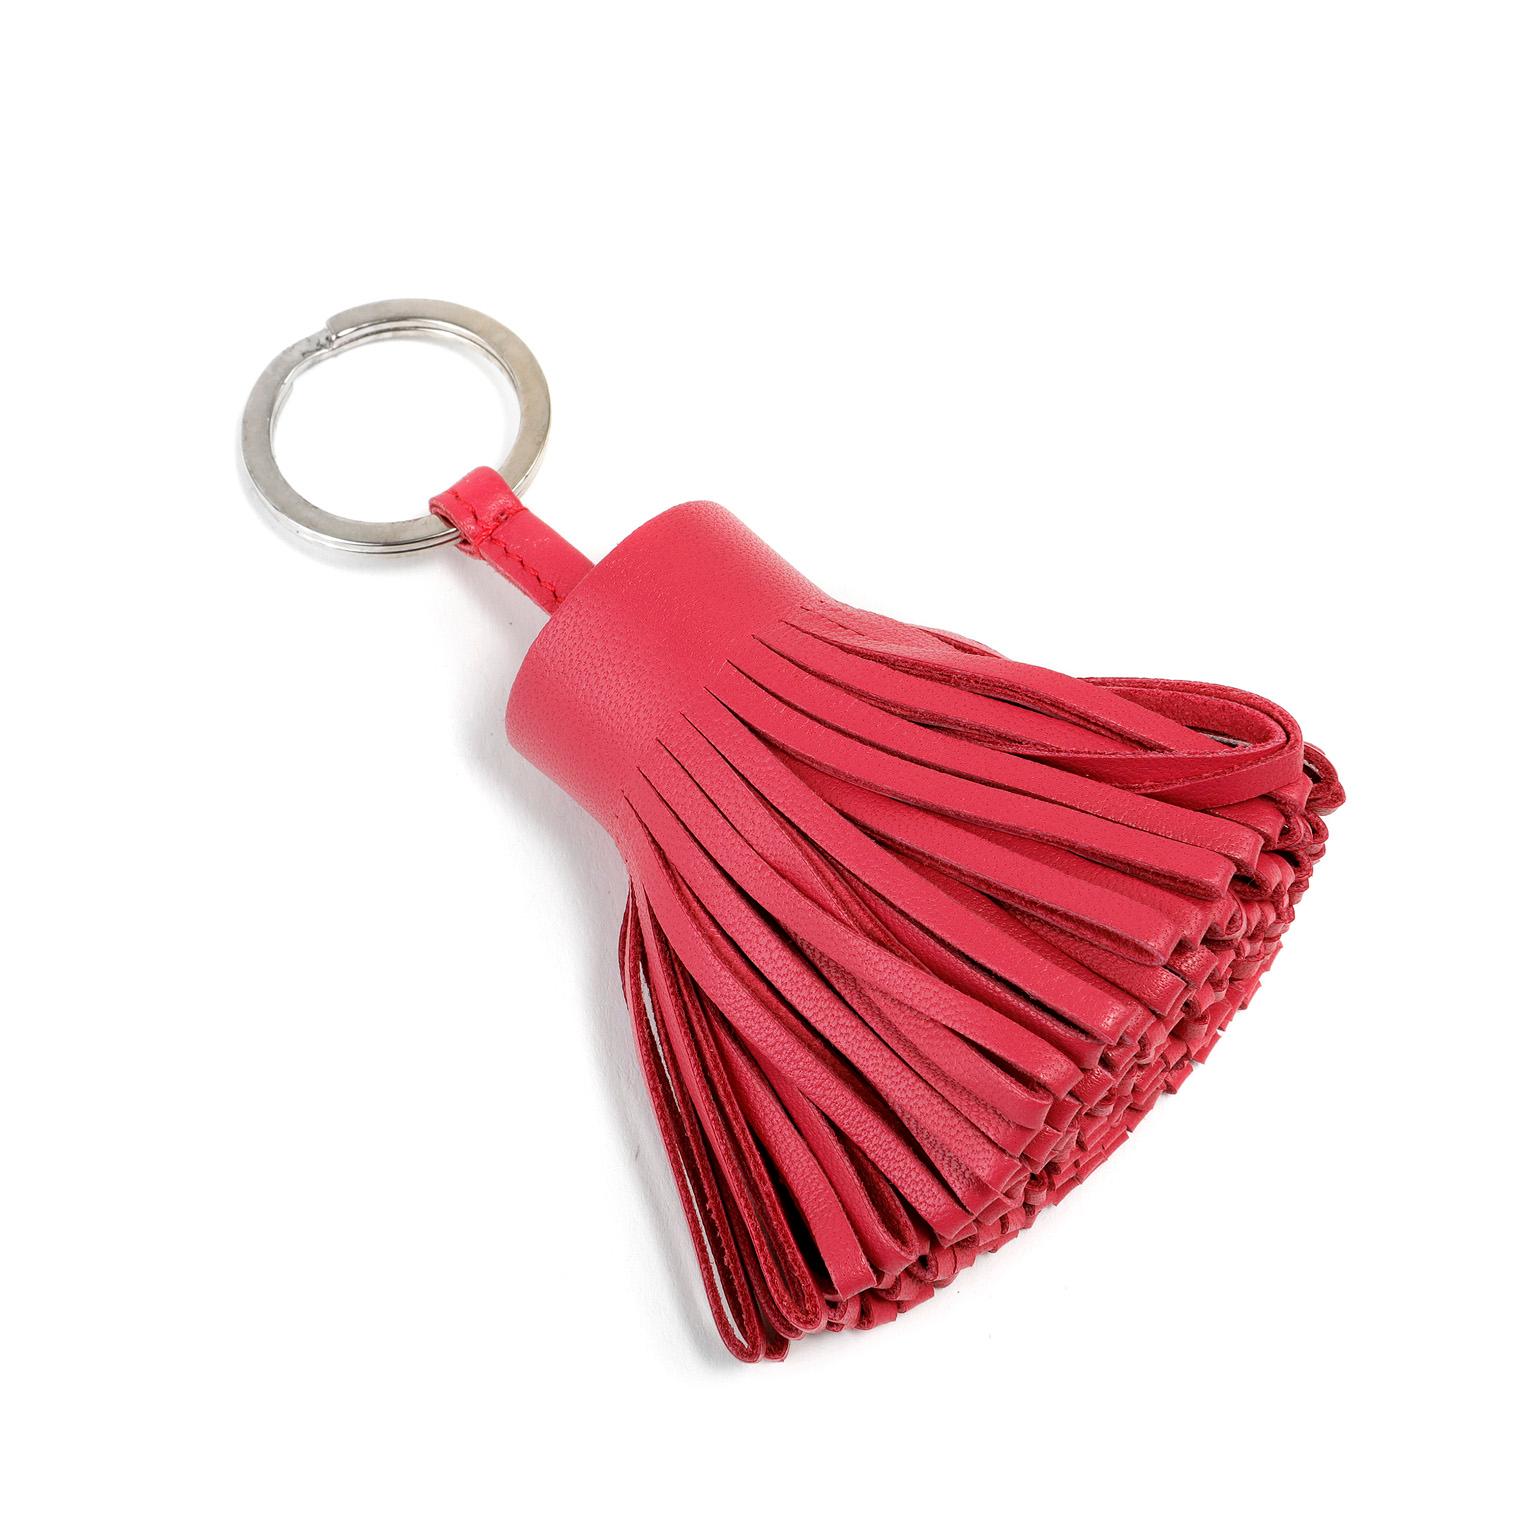 This authentic Hermès Rose Leather Tassel Key Holder is in pristine condition.  Rose pink leather large tassel fob connected to silver tone ring.  Carry your keys in style.

PBF 11441